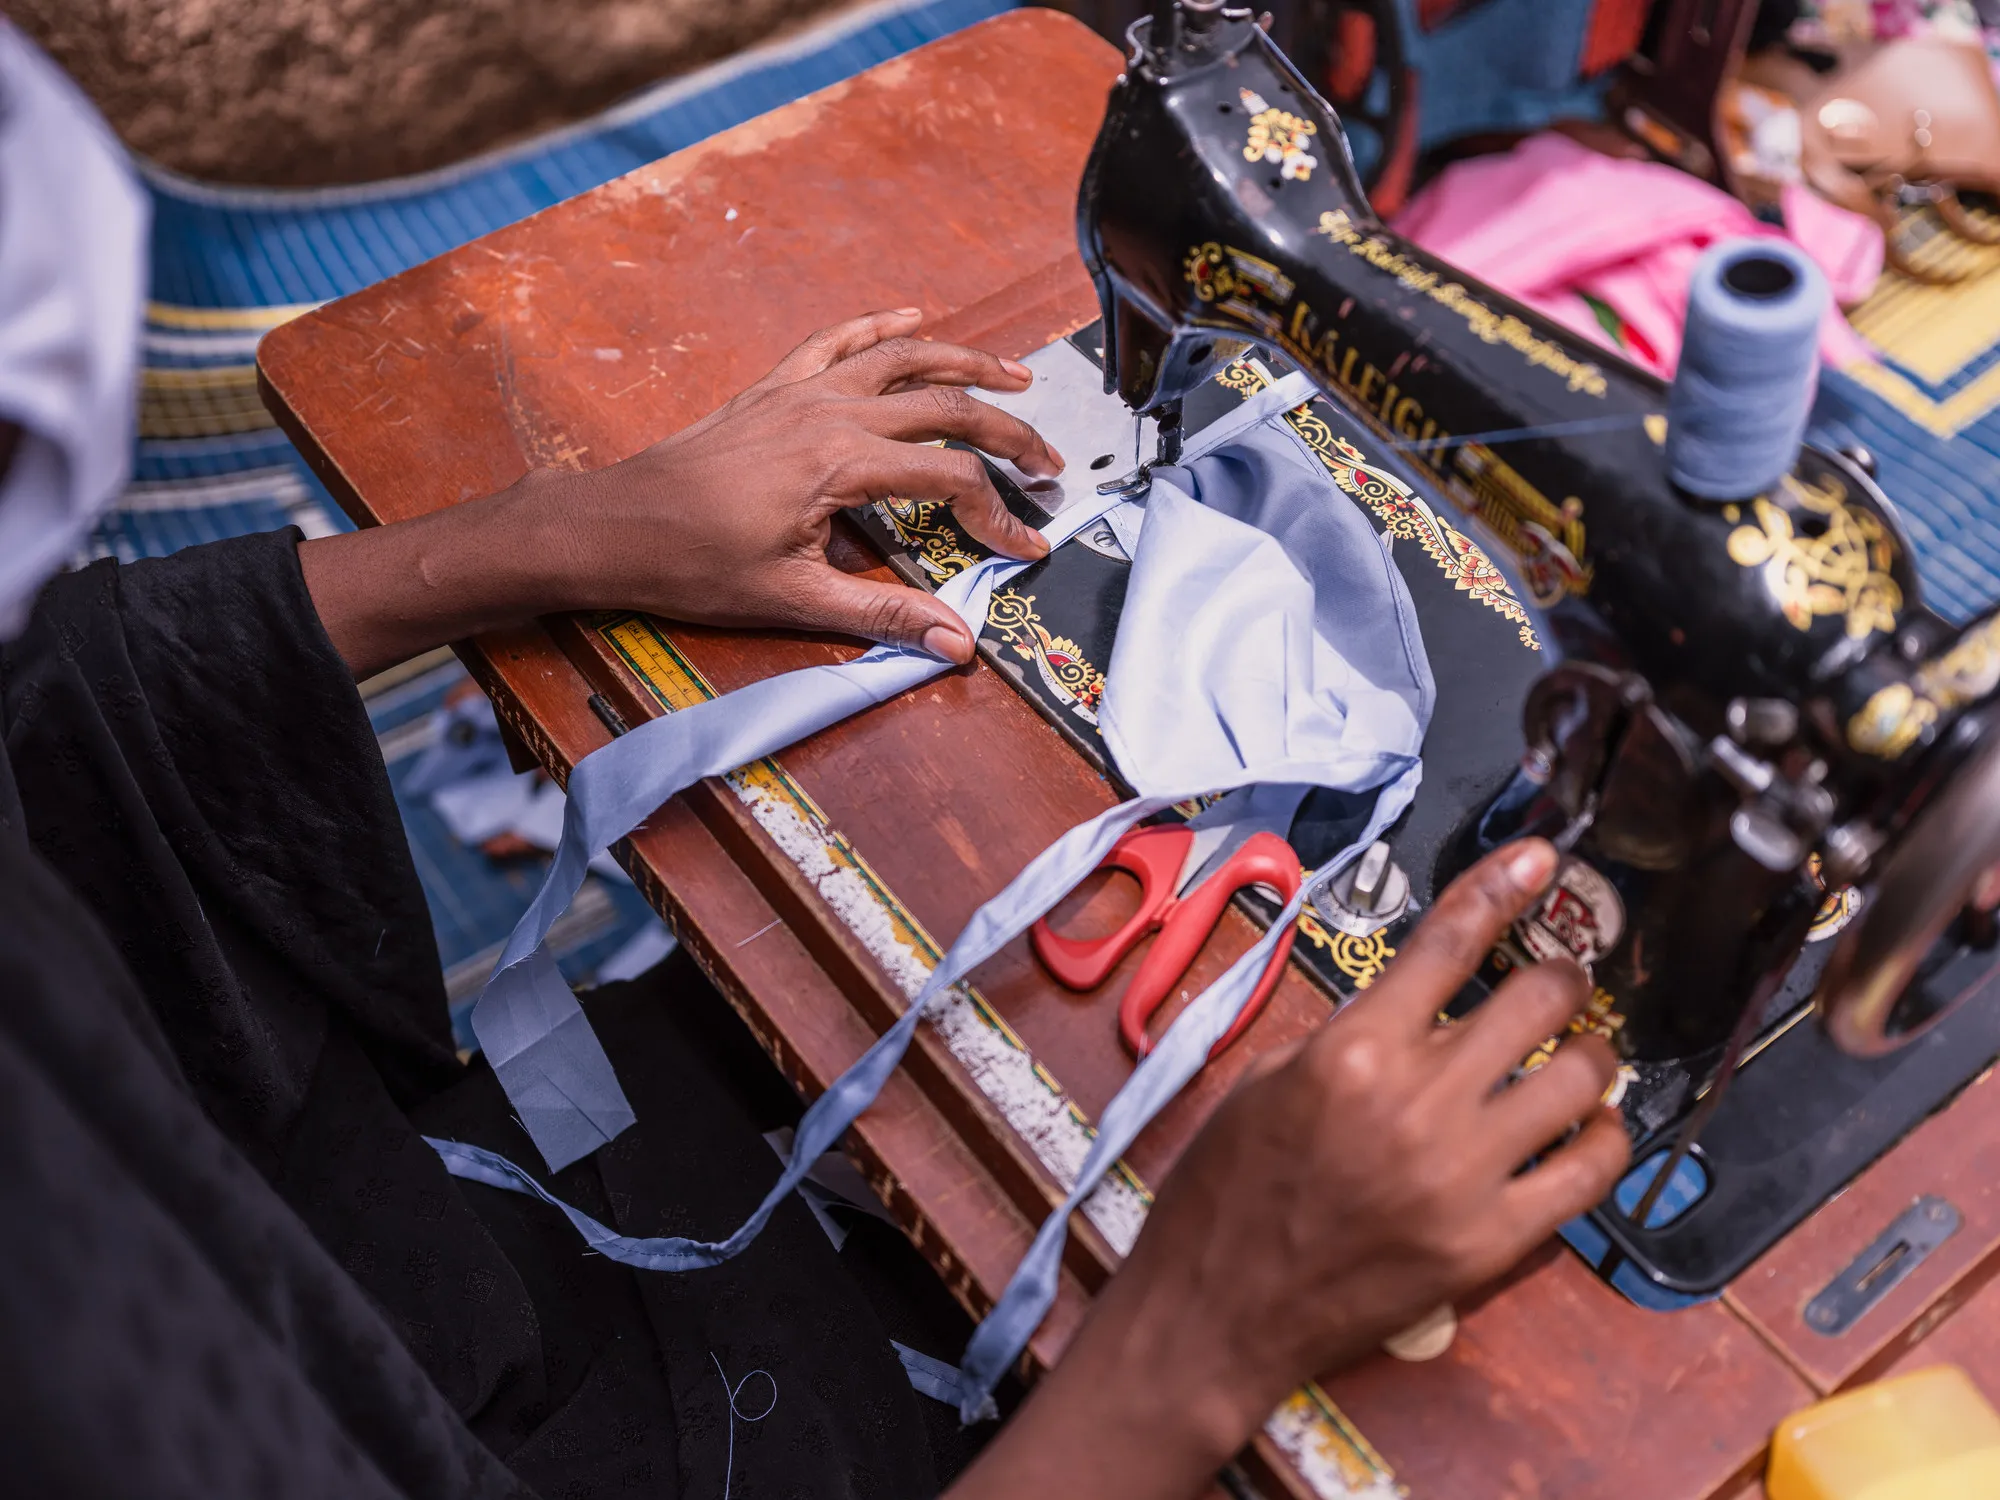 A woman in Niger uses a sewing machine to make a mask.